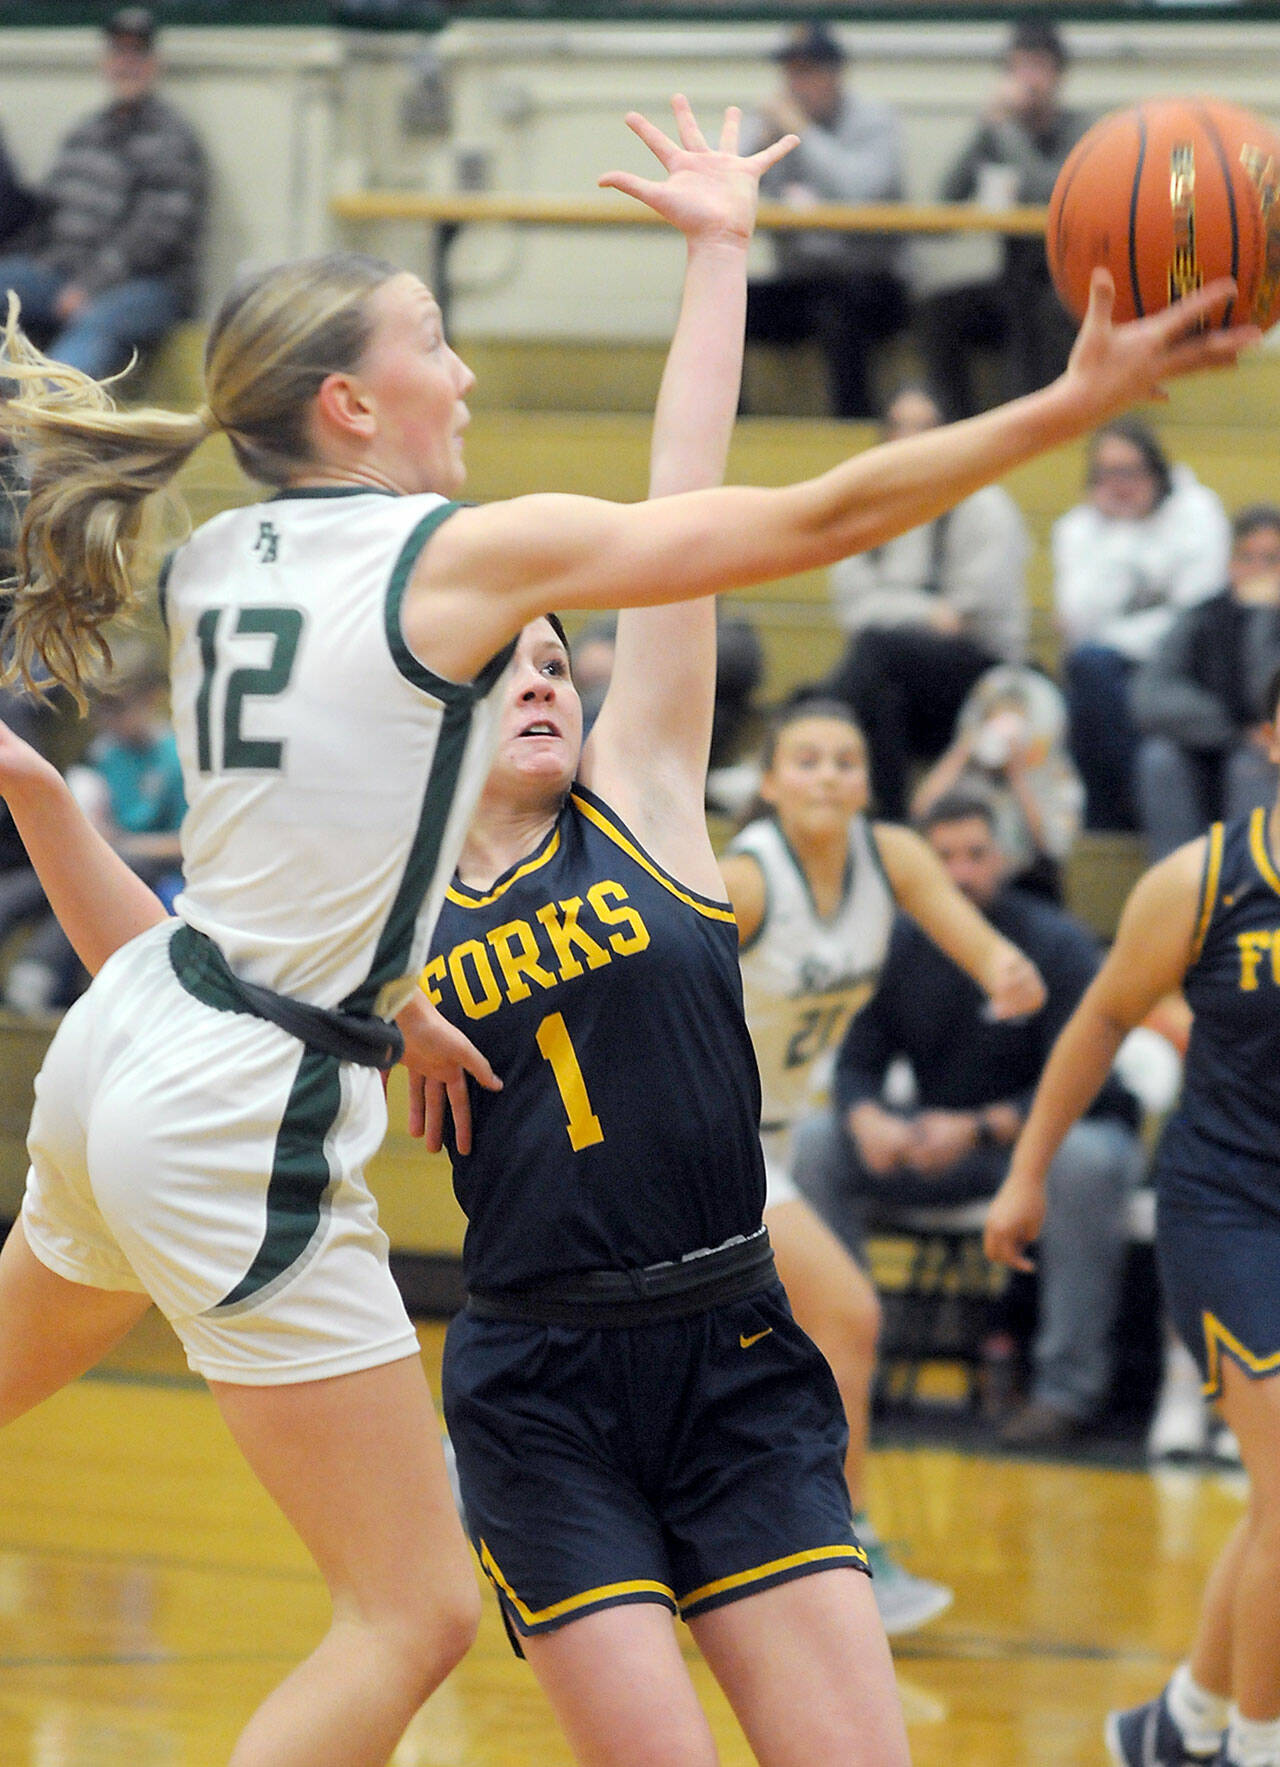 Port Angeles’ Izzy Felton, front, looks for the layup as Forks’ Bailey Johnson defends the lane on Tuesday night in Port Angeles. (Keith Thorpe/Peninsula Daily News)